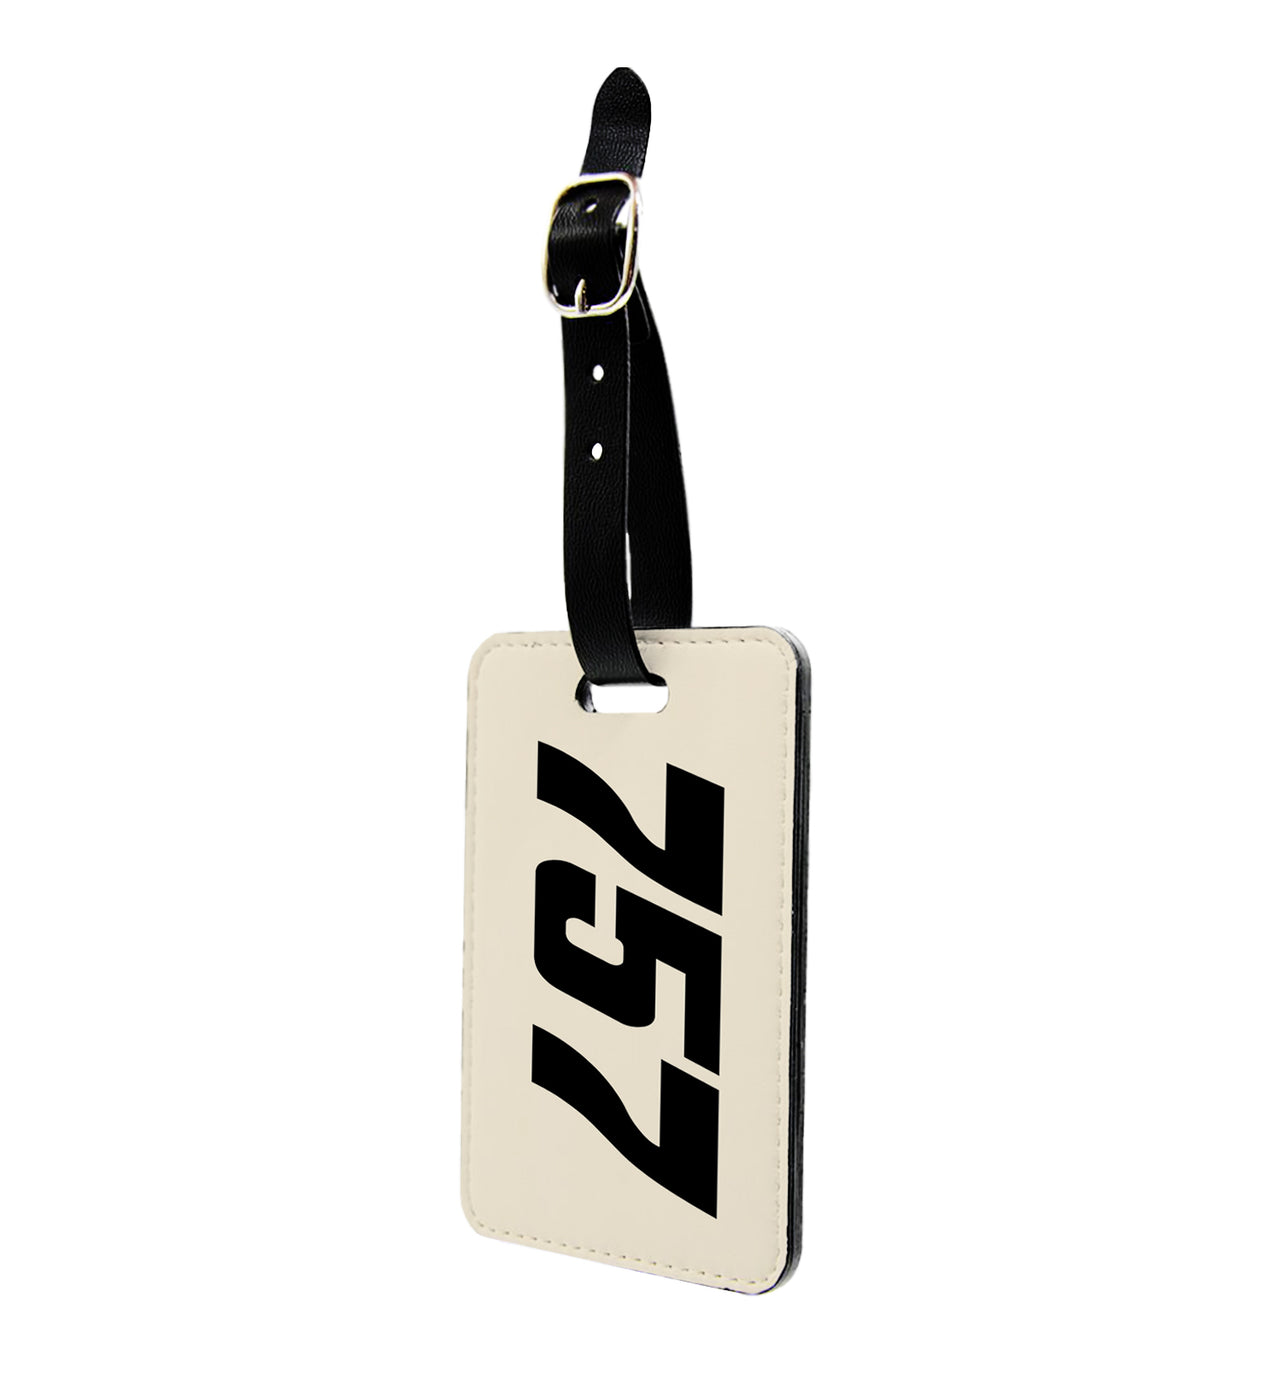 Boeing 757 Text Designed Luggage Tag